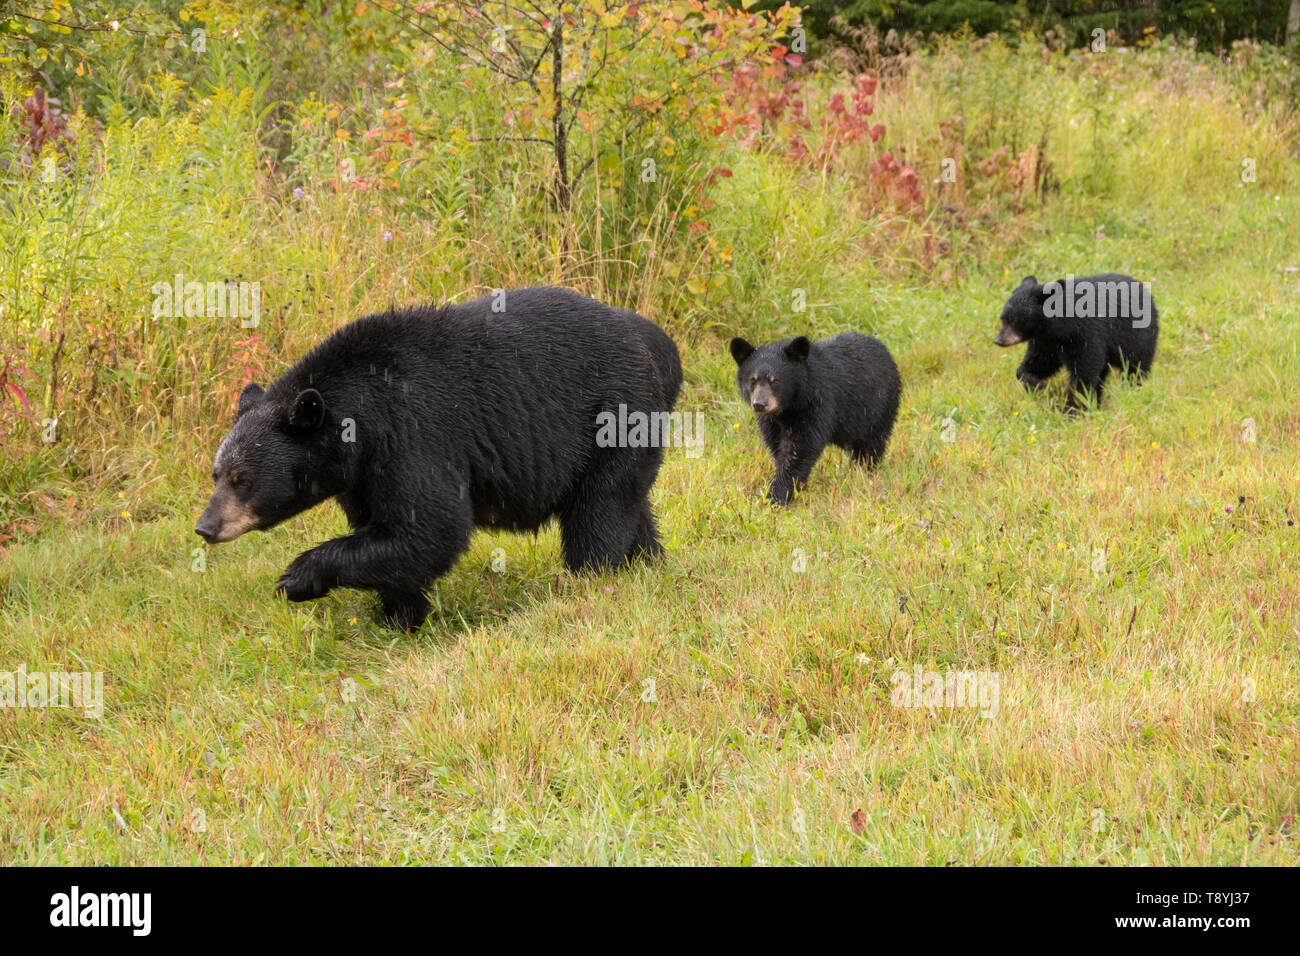 American black bear (Ursus americanus) mother and cubs, boreal forest near Lake Superior National Marine Conservation Area, Ontario, Canada Stock Photo